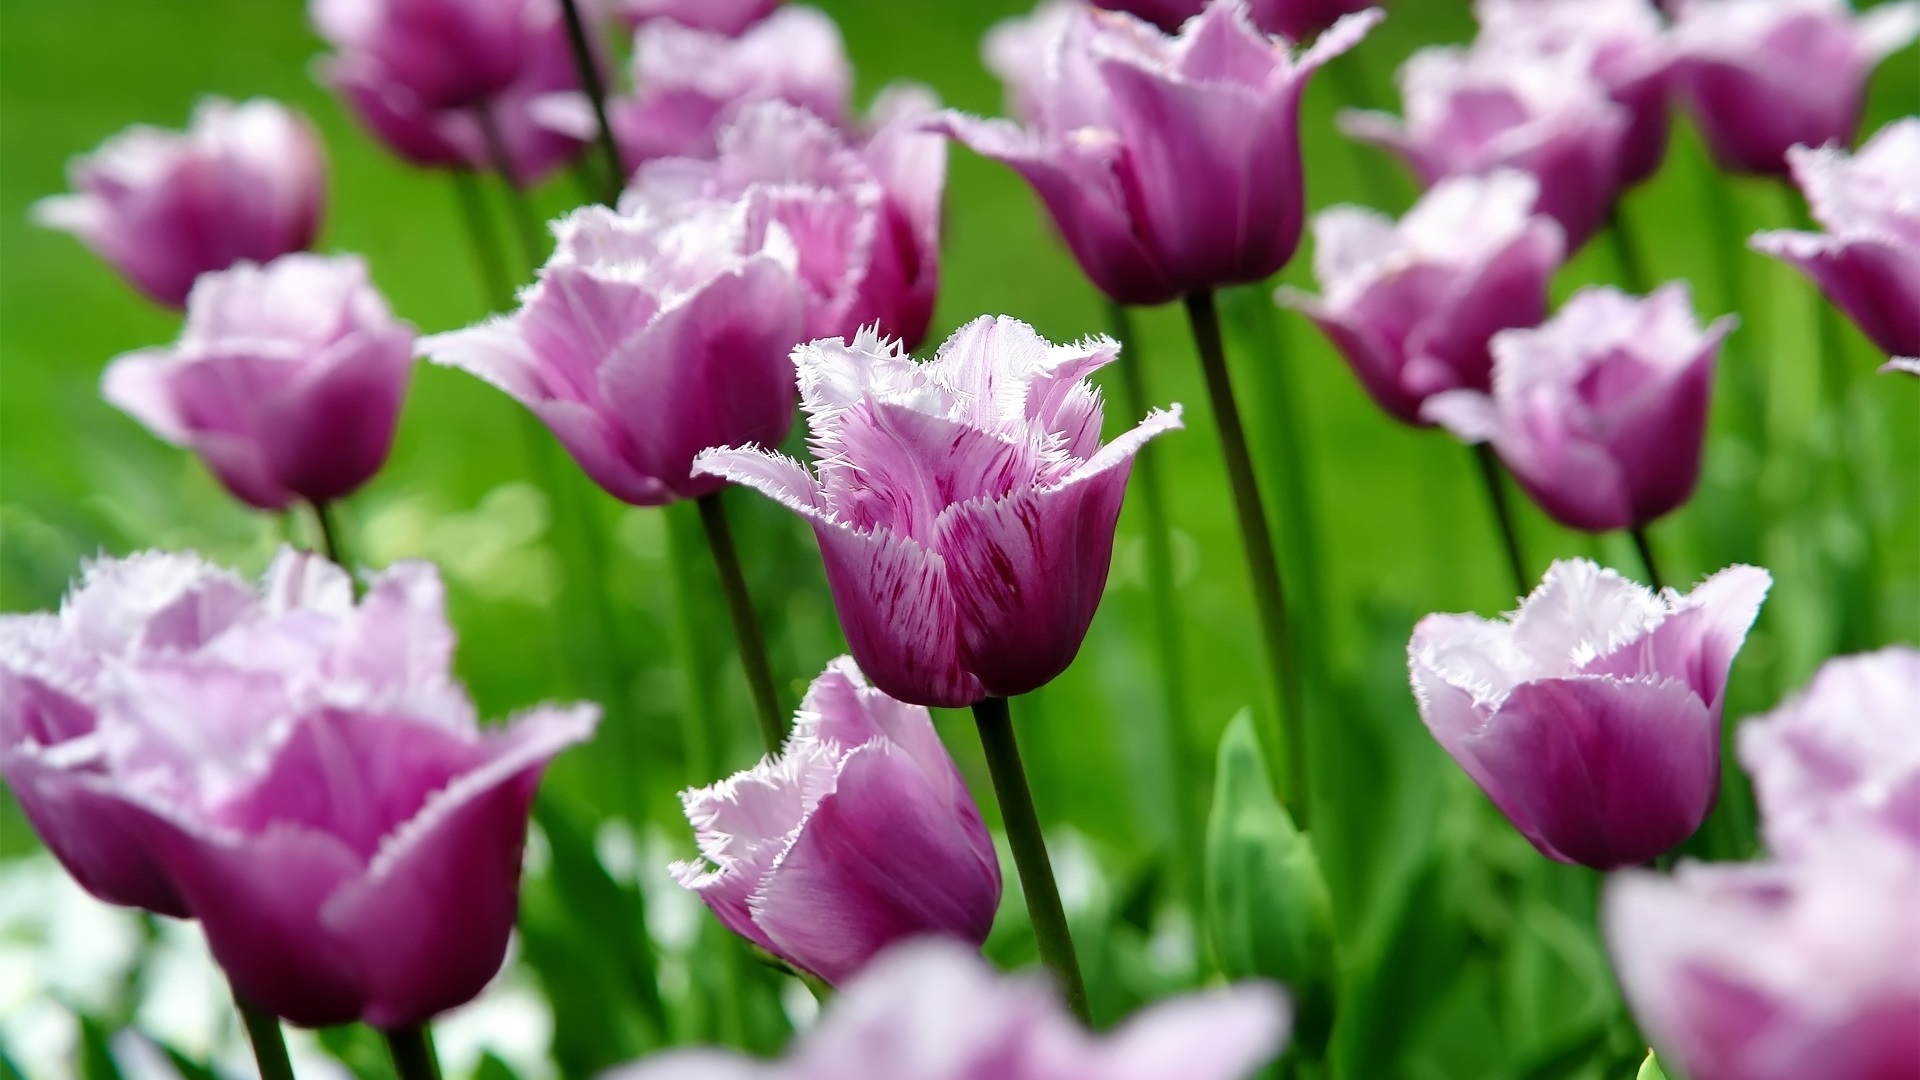 General 1920x1080 tulips flowers plants nature